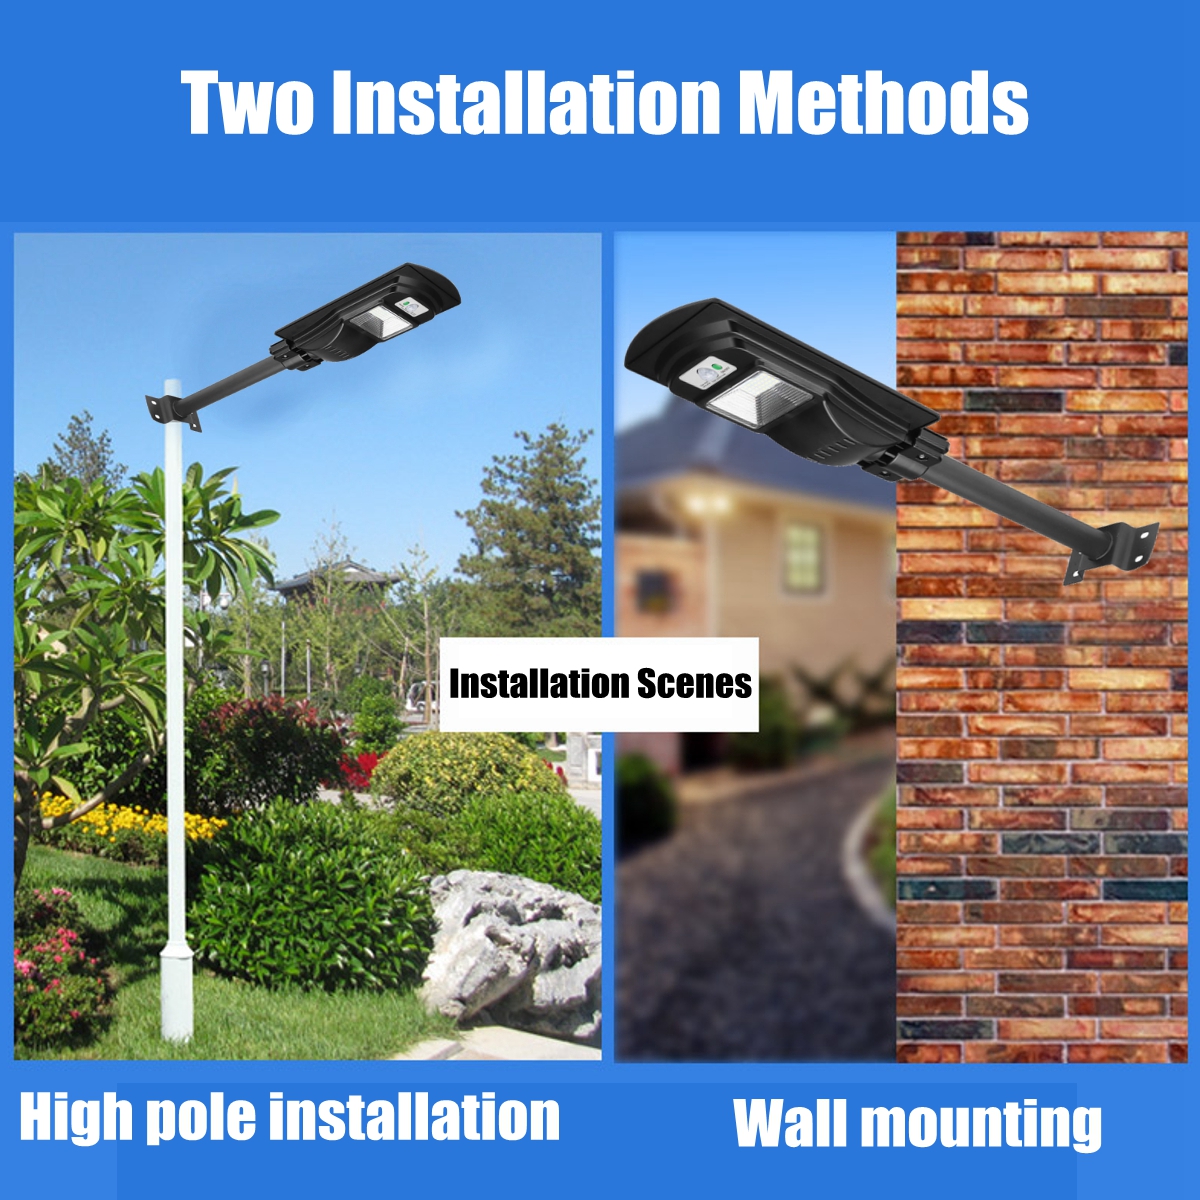 117234351-LED-Solar-Wall-Street-Light-PIR-Motion-Sensor-Outdoor-Lamp-with-Remote-Controller-1694433-8